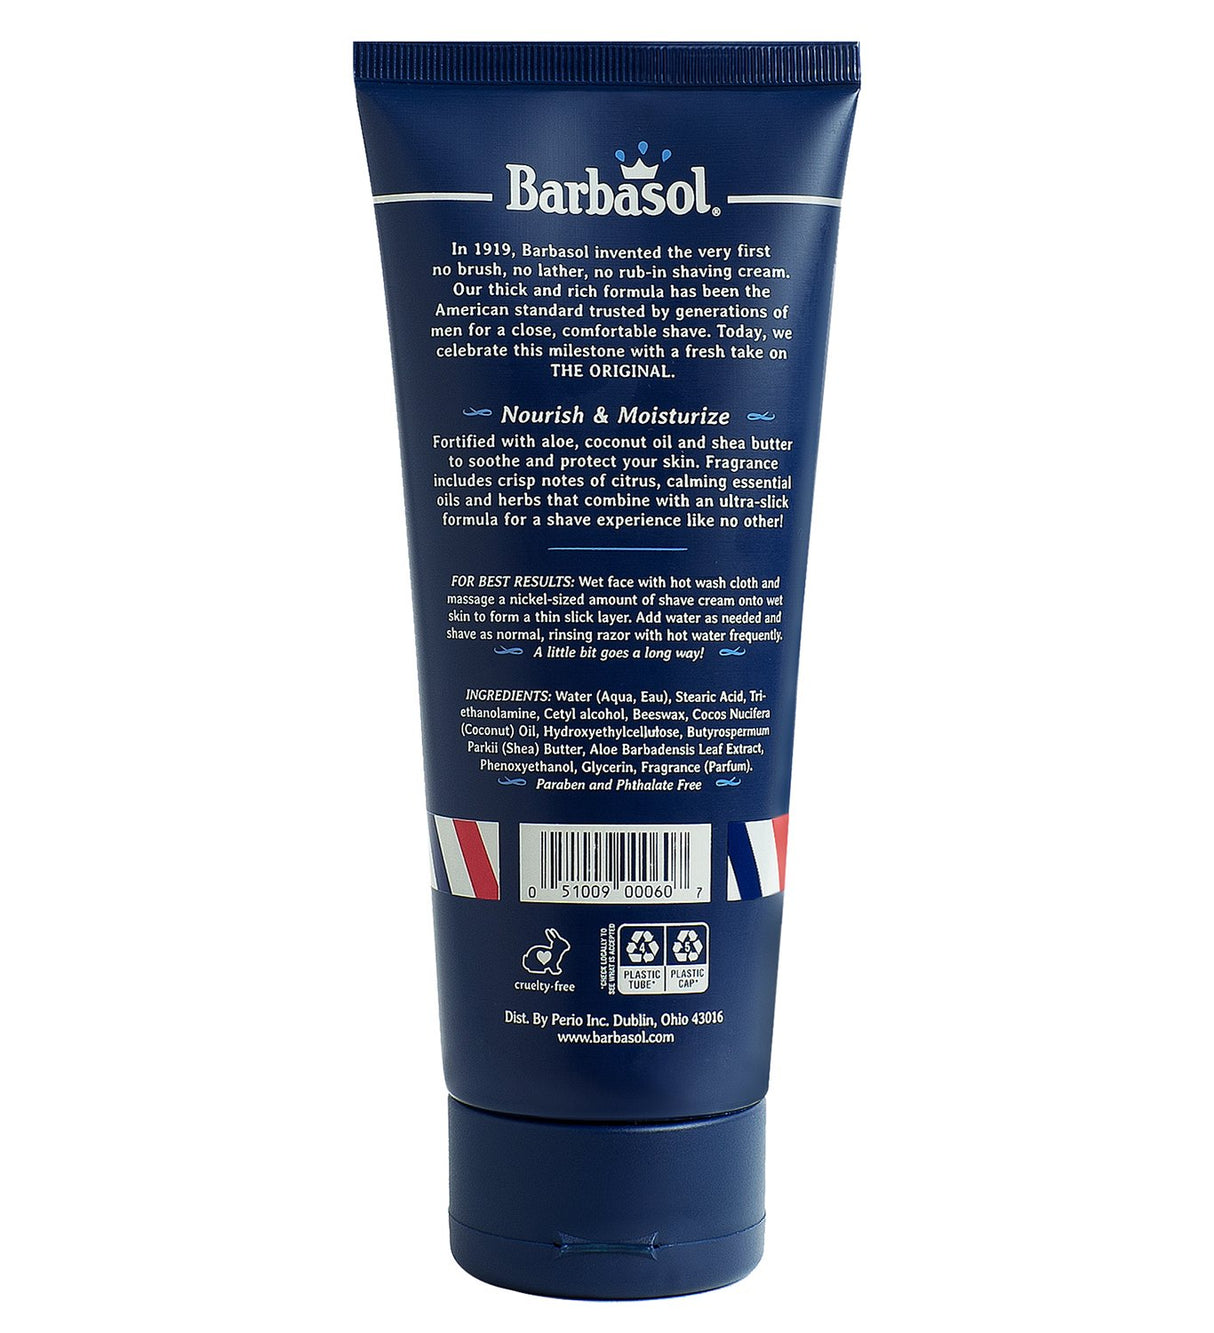 Barbasol - 1919 Classic Shaving Cream - 6 Ounces  In 1919, Barbasol invented the very first no brush, no lather, no rub-in shaving cream. Today, we celebrate this milestone with a fresh take on THE ORIGINAL!